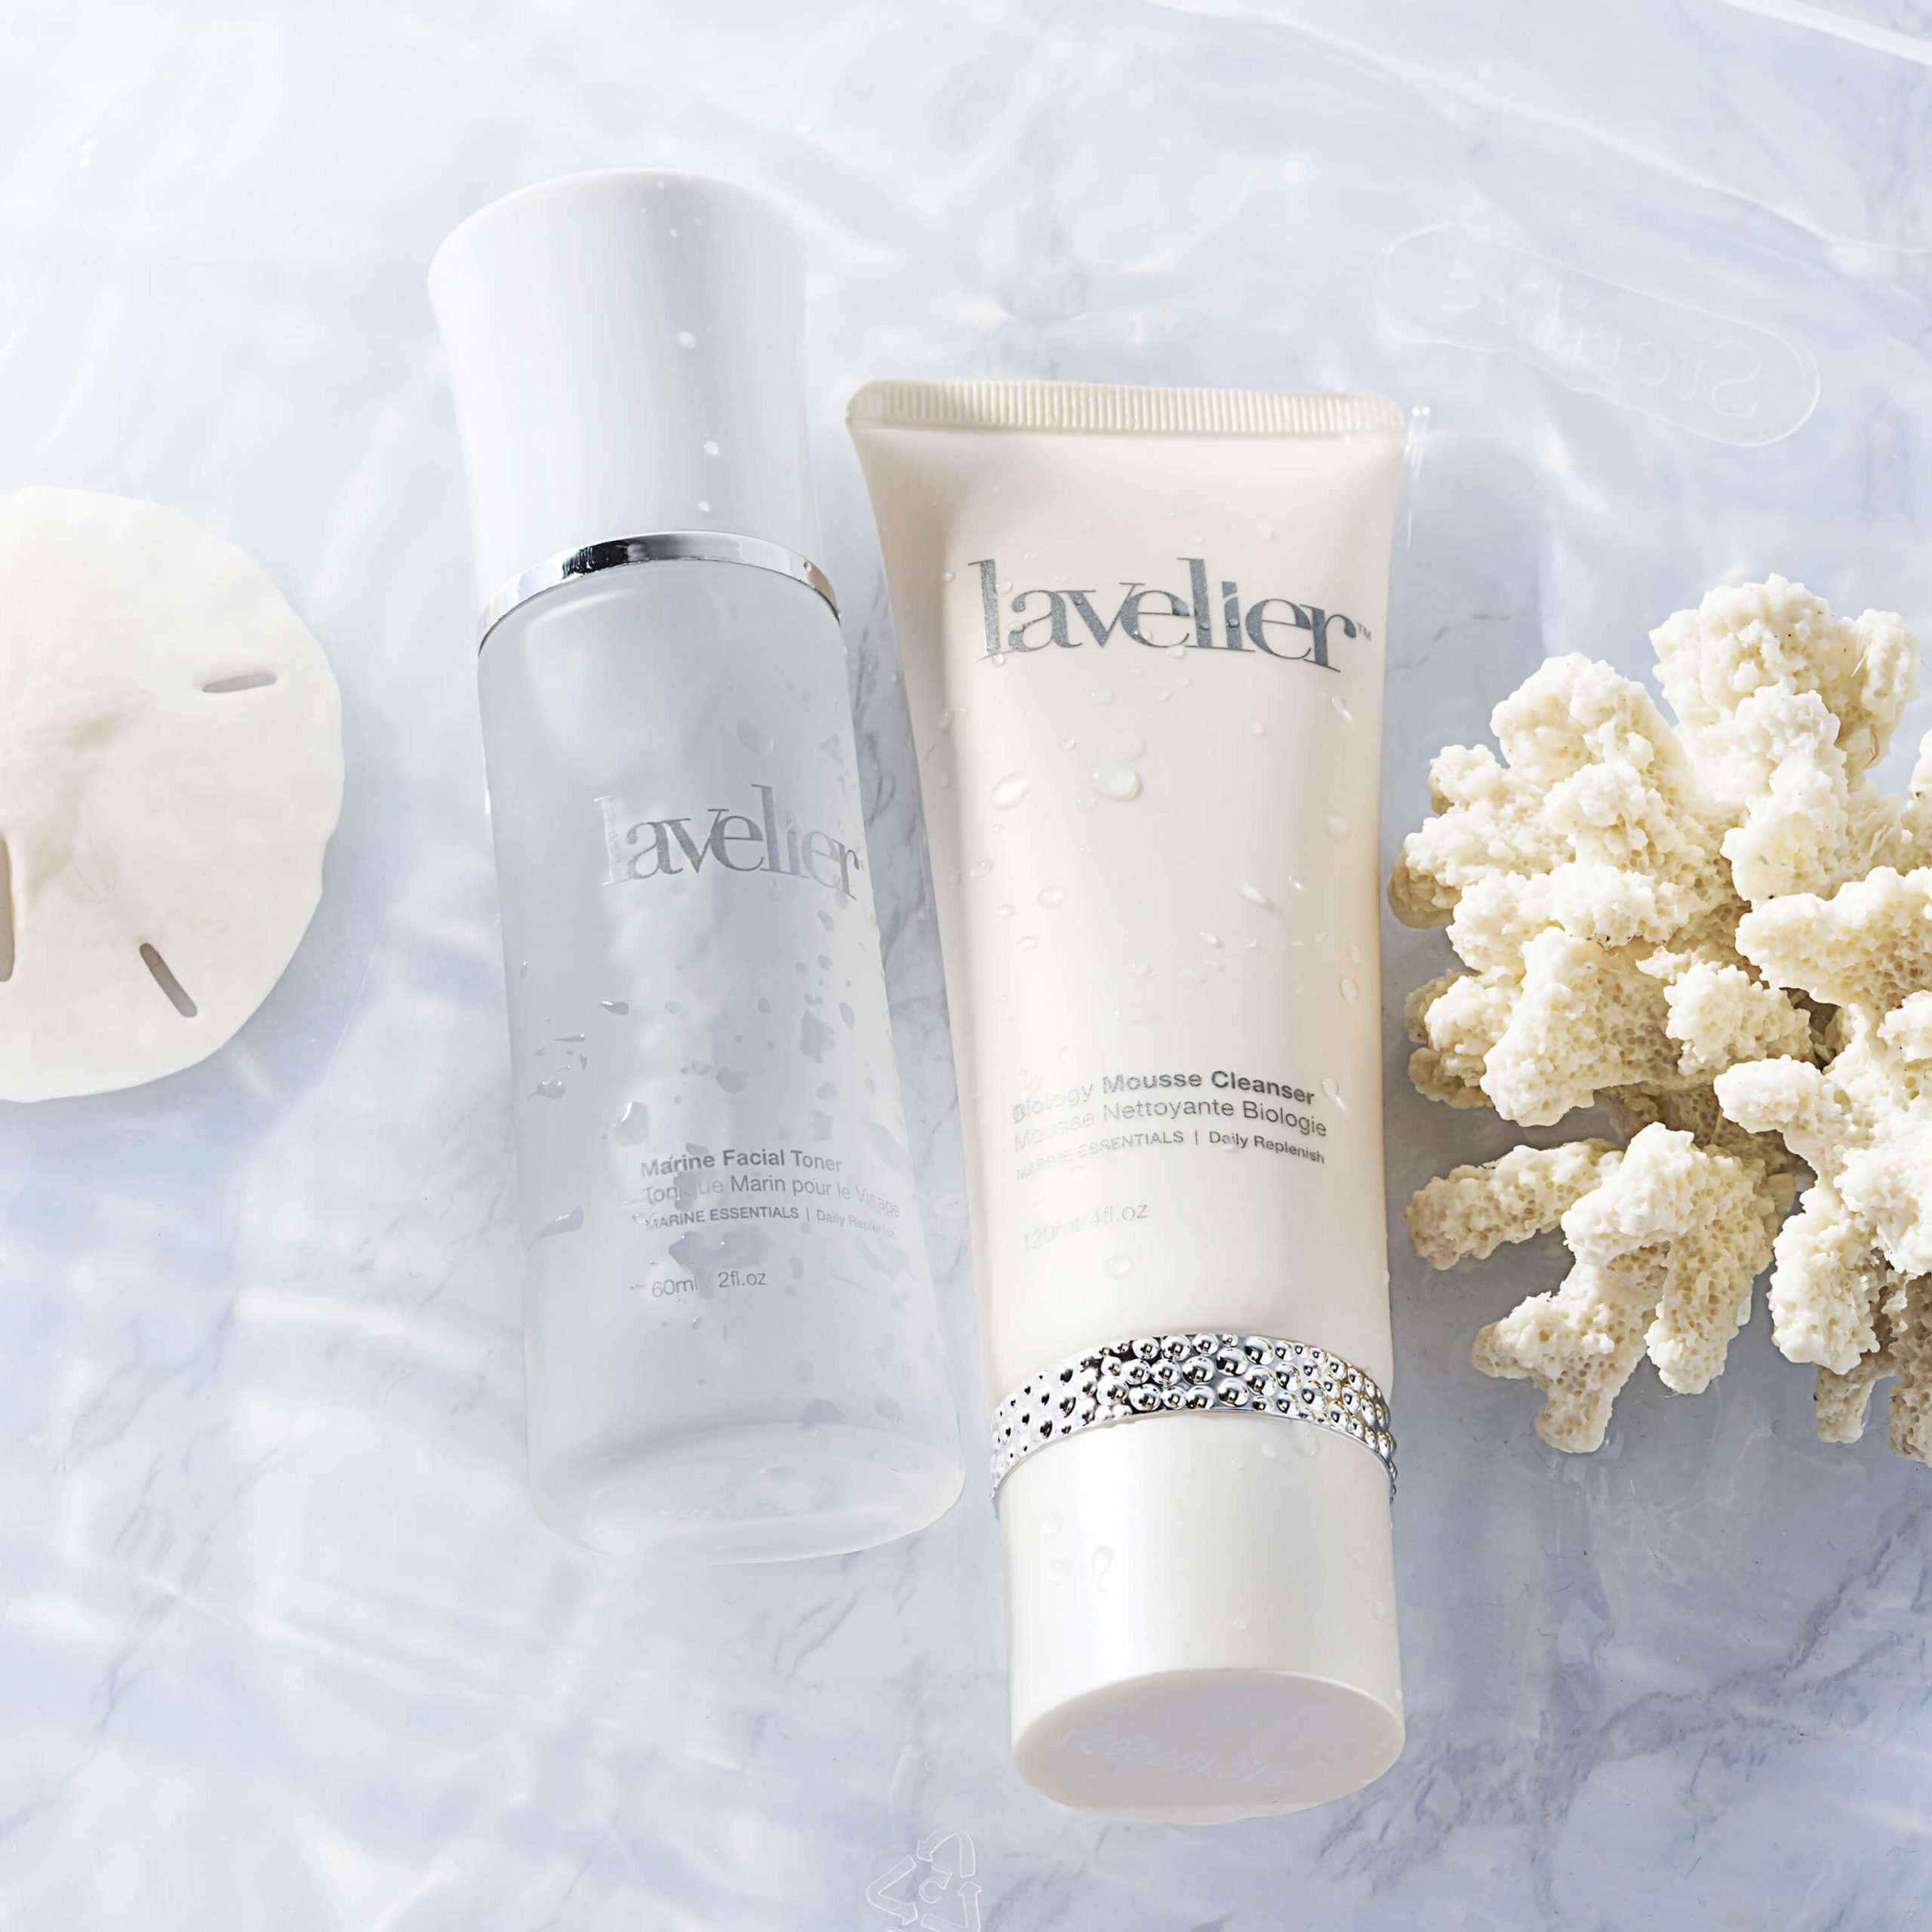 Lavelier skin products